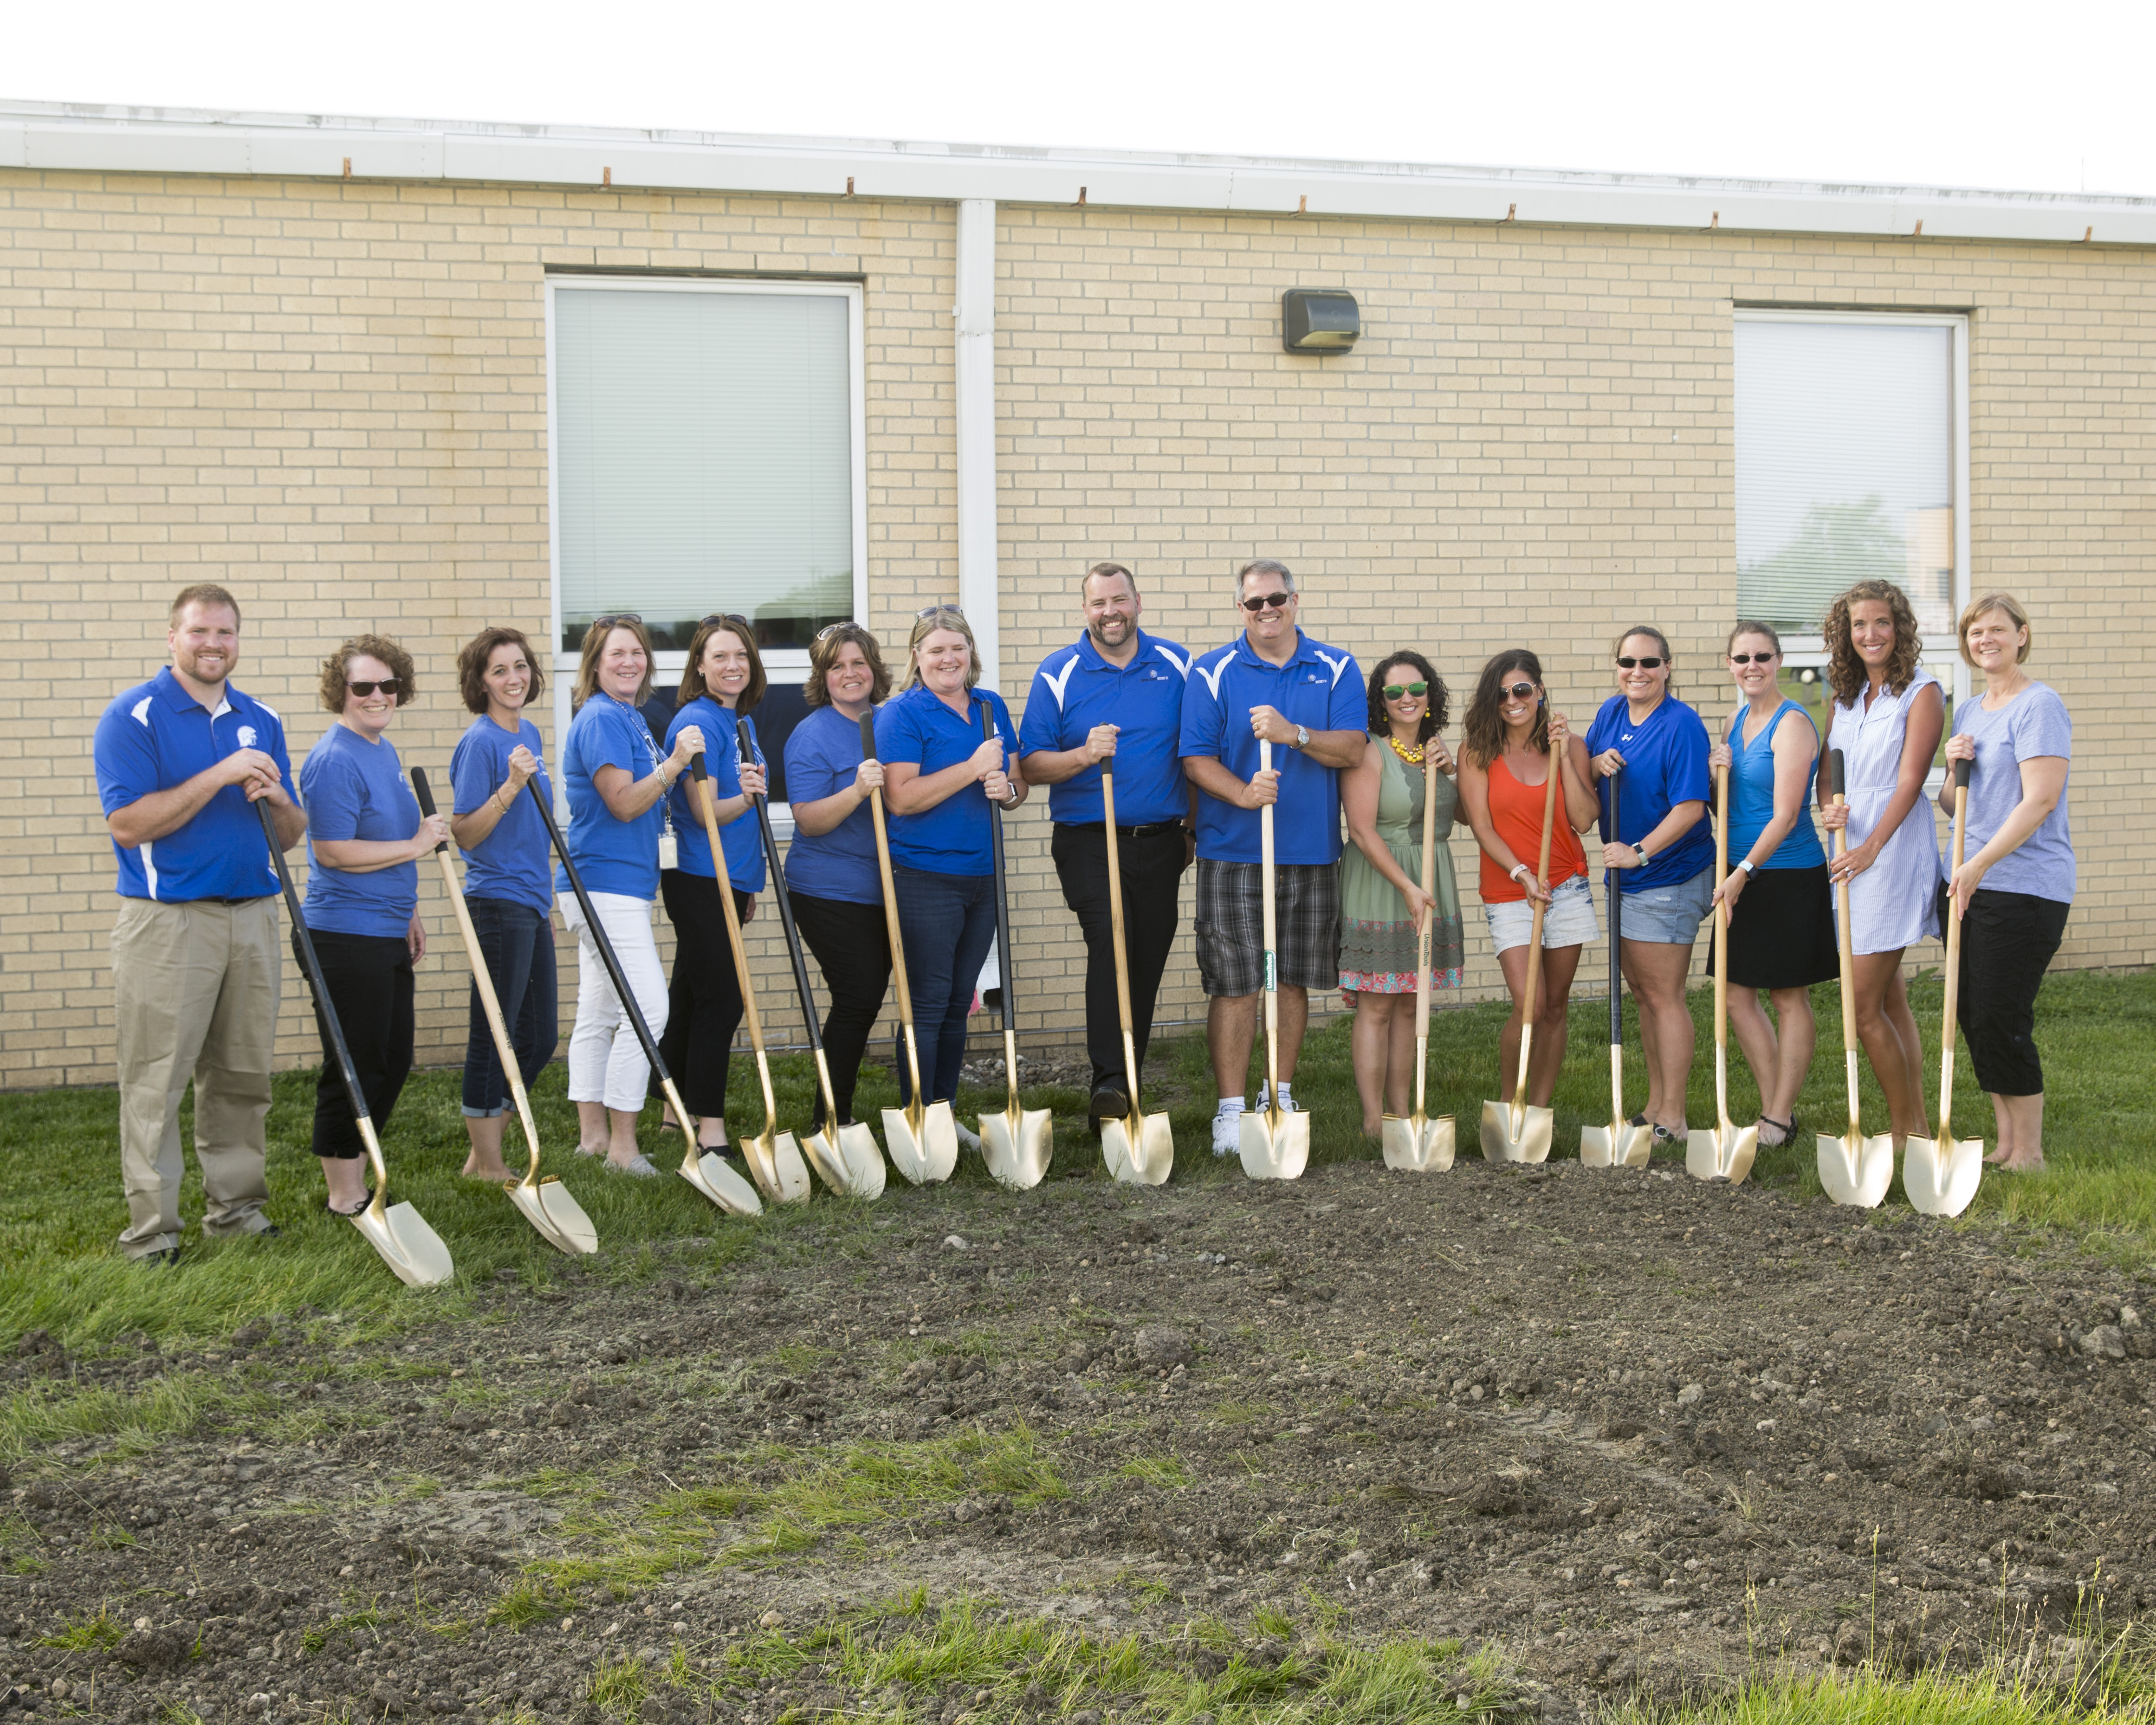 A larger group of teachers with the same blue polo shirt and holding up a set of shovels as well.